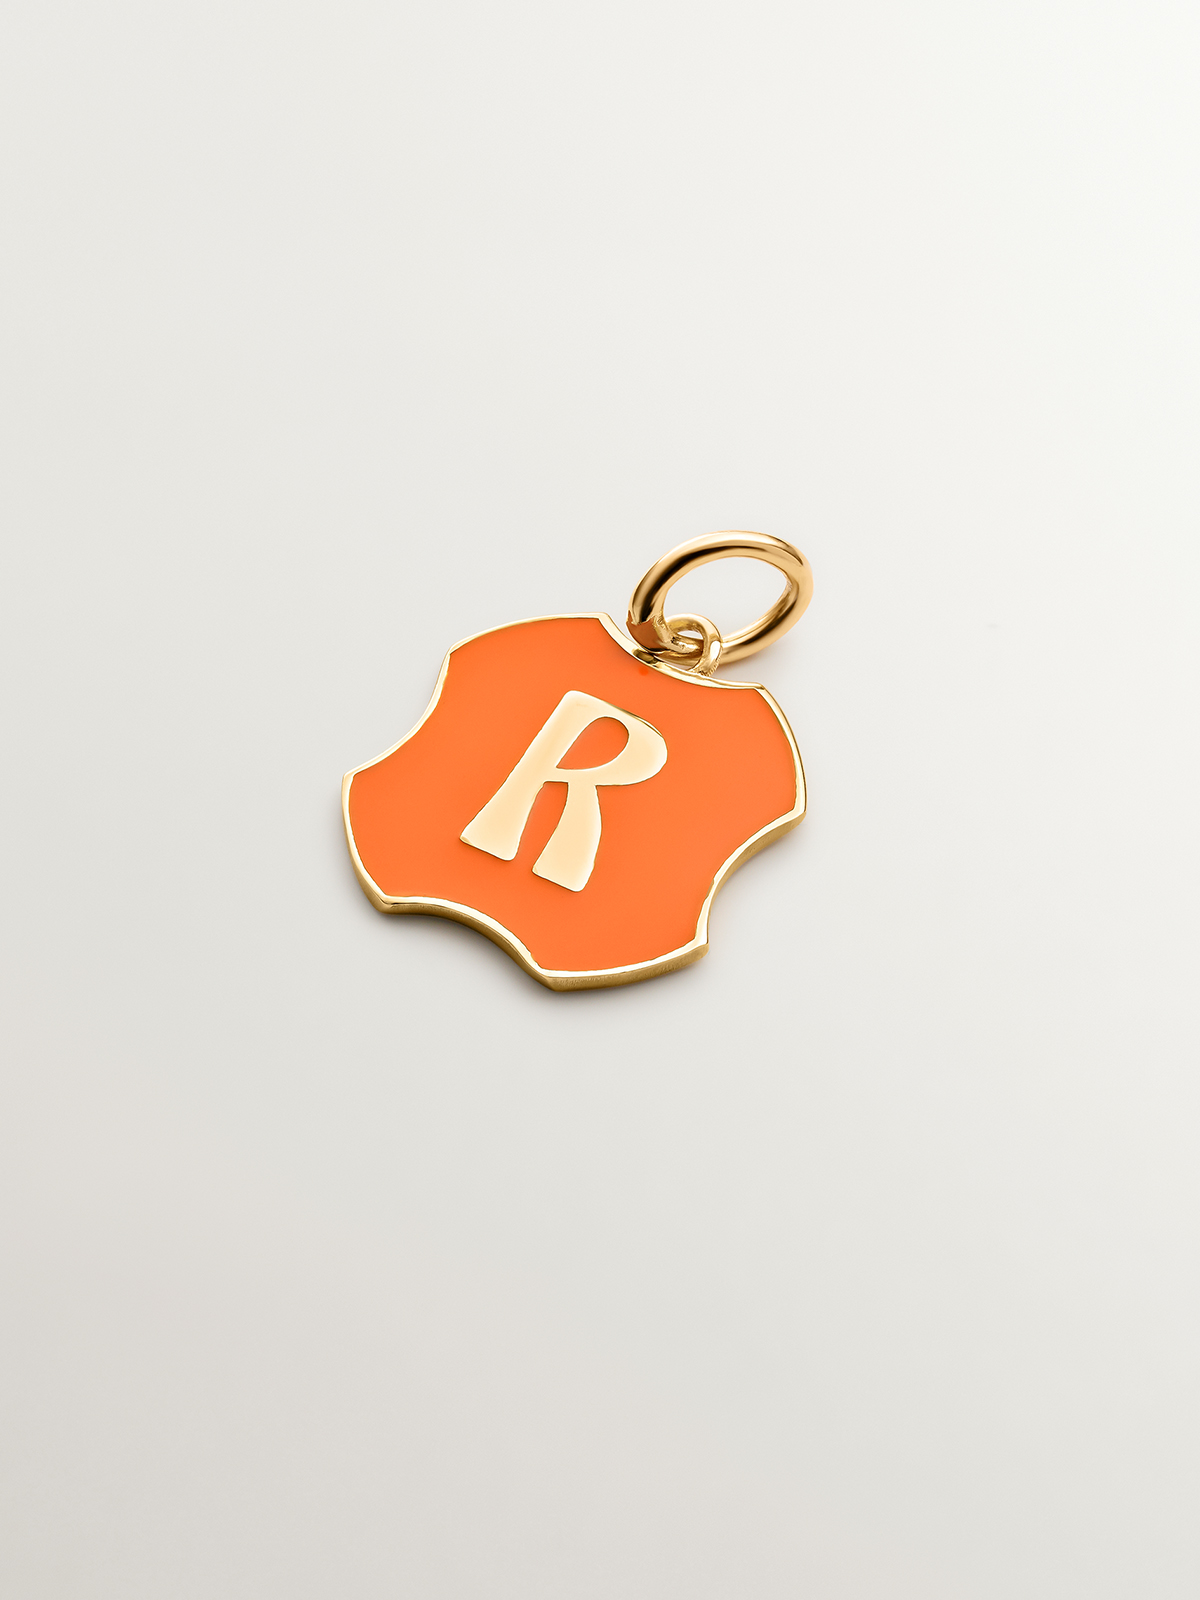 Charm in 925 sterling silver plated in 18K yellow gold with initial R and orange enamel with irregular shape